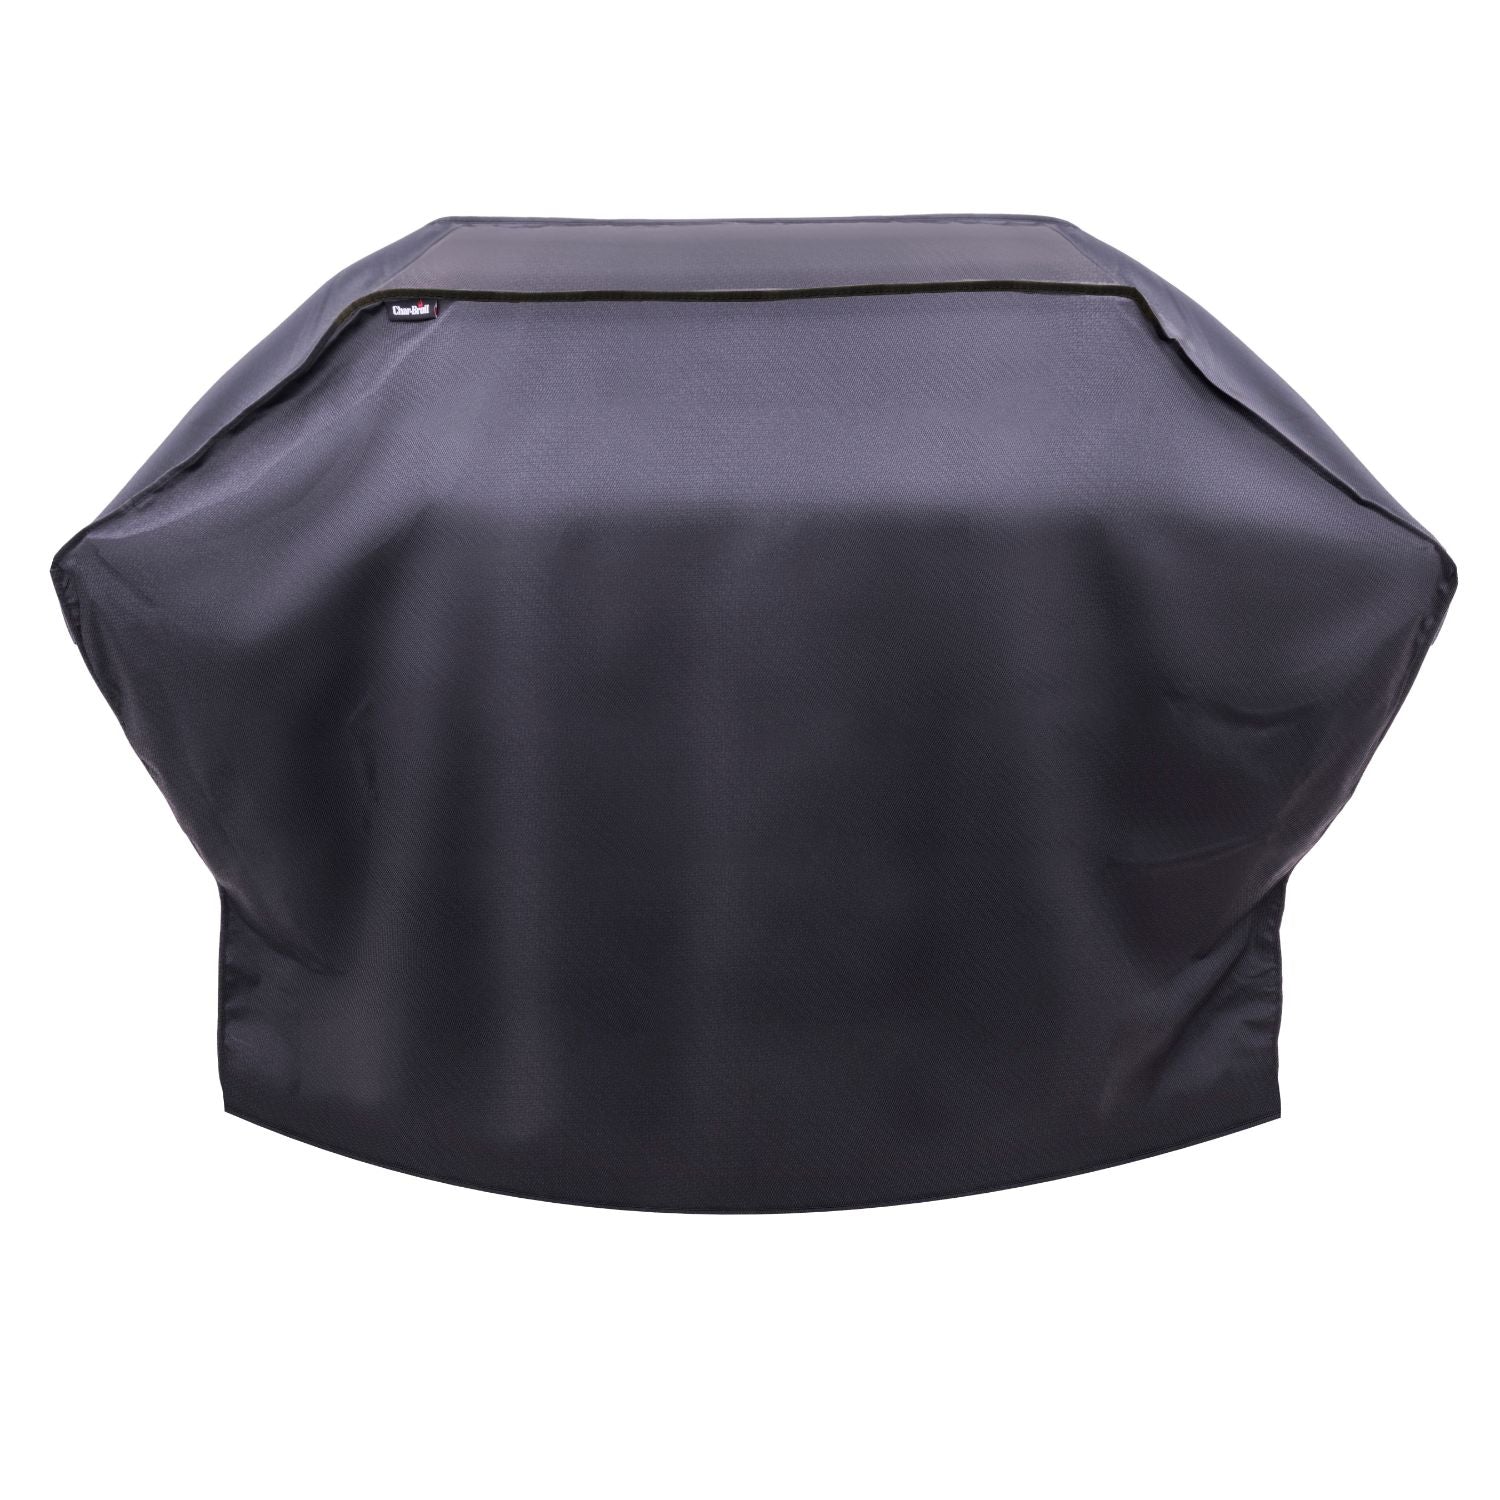 Char-Broil X-Large 5 Plus Burner Performance Grill Cover